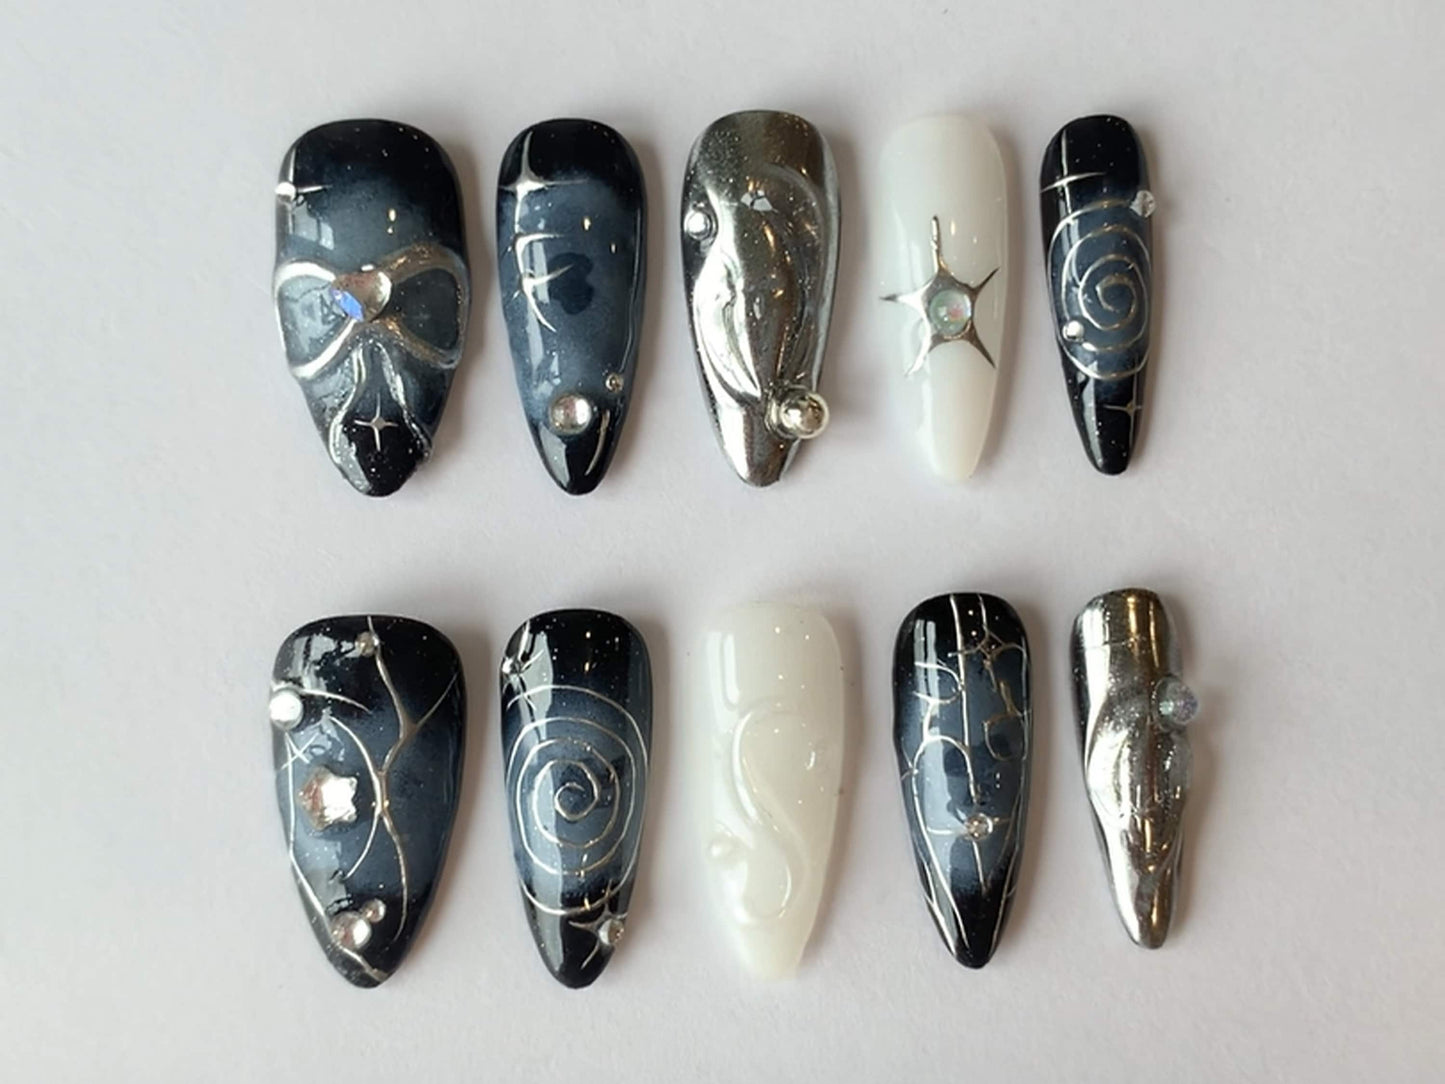 Y2k Nail Set with Sliver Motifs | Y2k-Inspired Press On Nails| Sliver and Blue with Unique Chrome Designs | J131